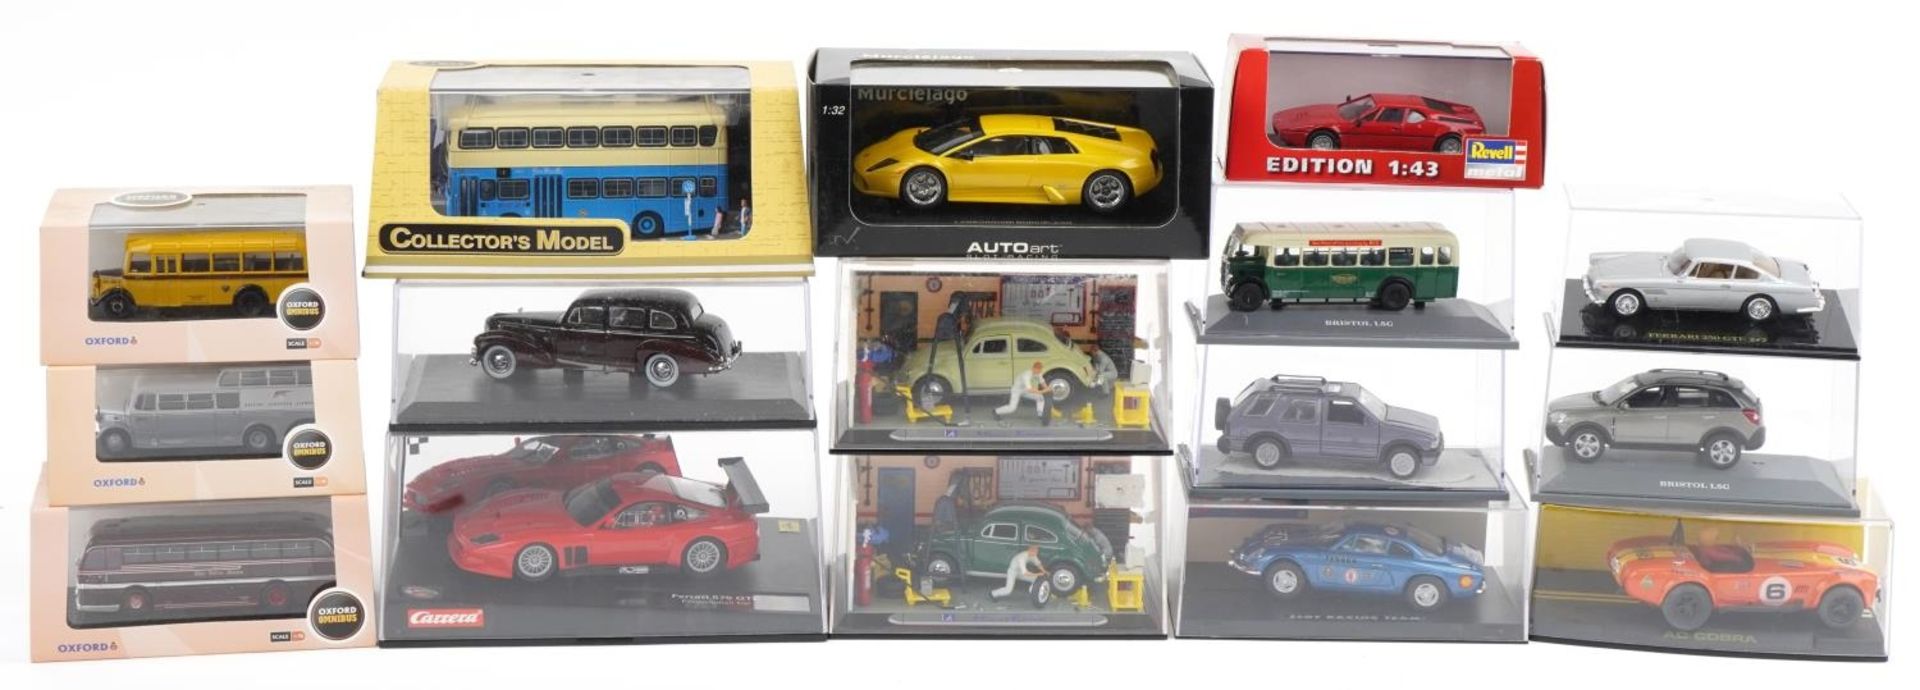 Collection of diecast vehicles with boxes including Oxford Omnibus, Hot Wheels and Revell